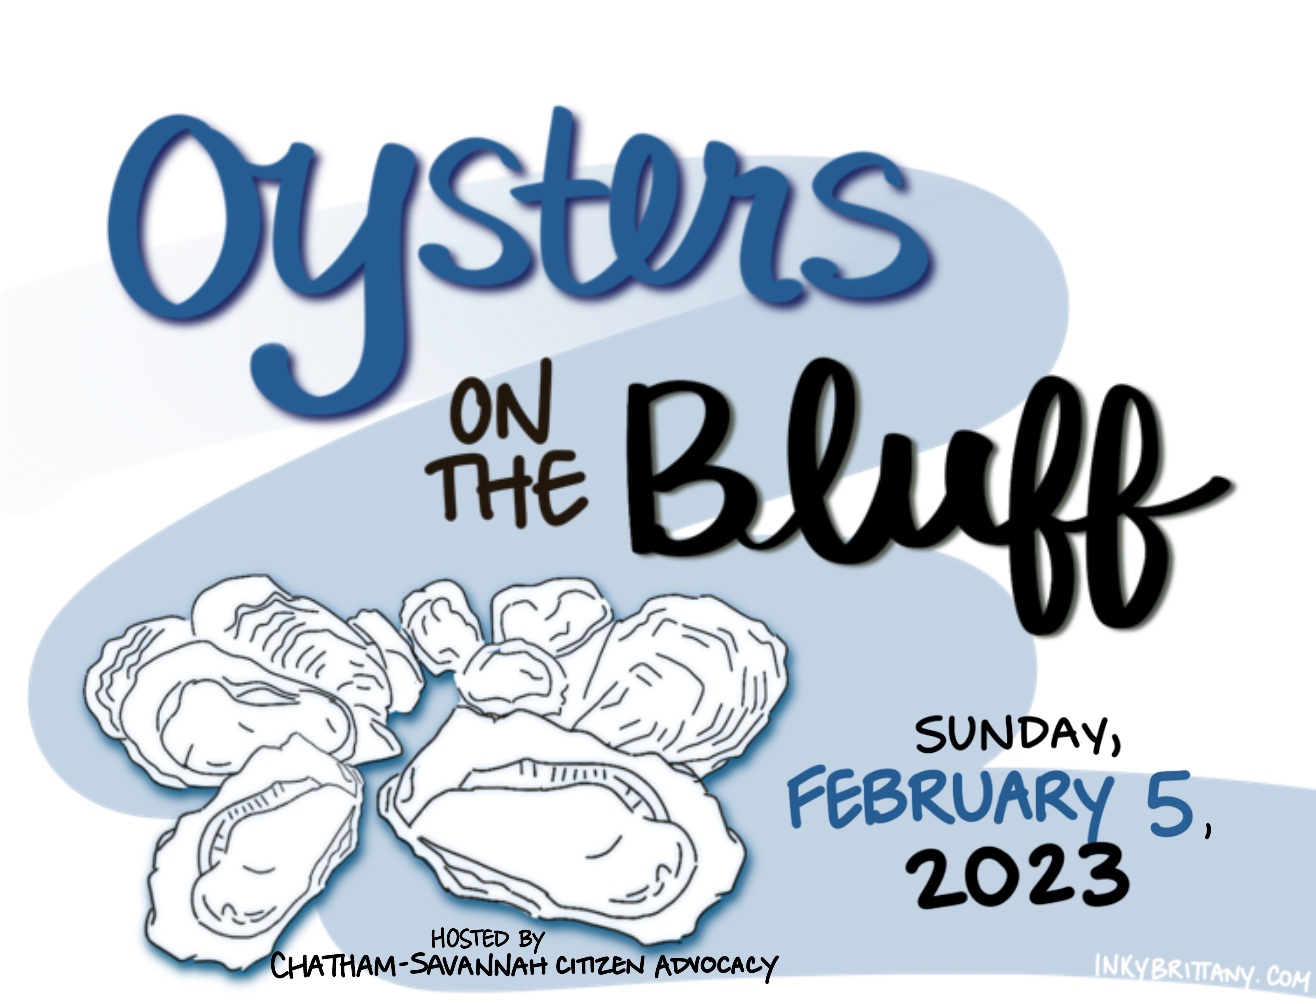 Illustration of Oysters for Oysters on the Bluff